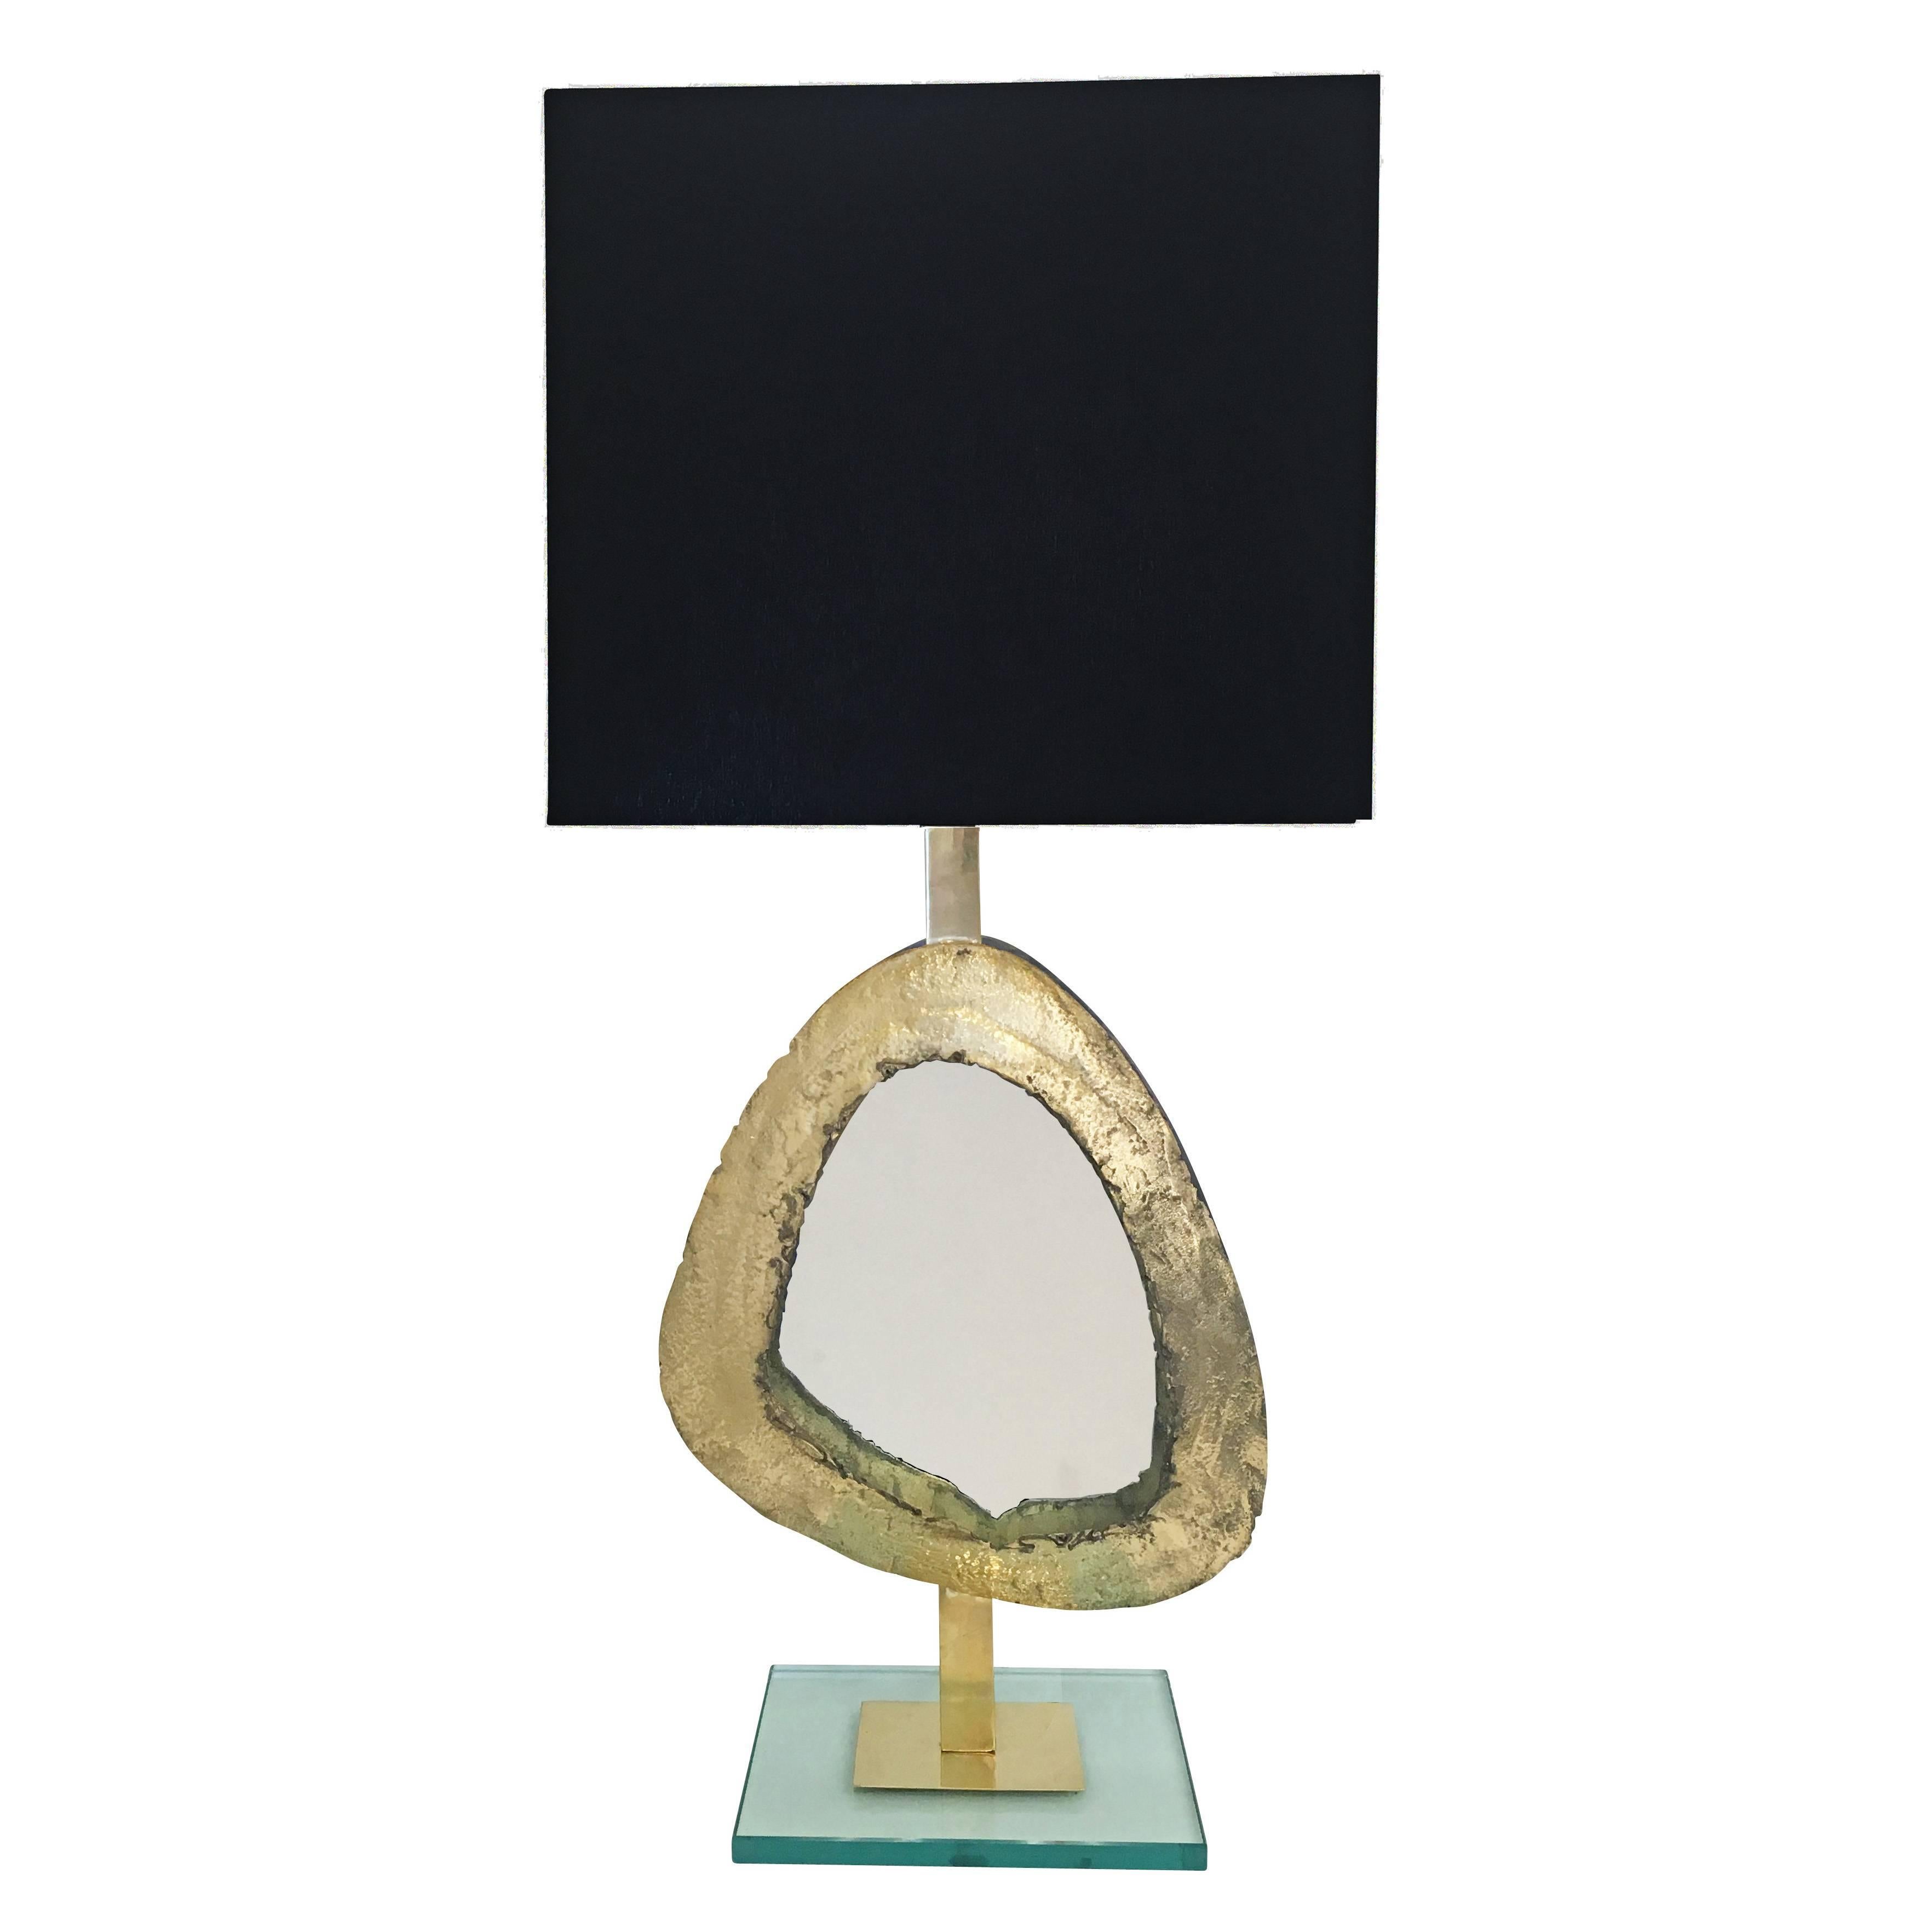 Large brass and glass table lamp designed by Italian artisan Daniele Bottacin for Gaspare Asaro’s studio collection, form A. Each handmade piece features a Brutalist frame which contrast beautifully with the clean lines of the mirrored centre and